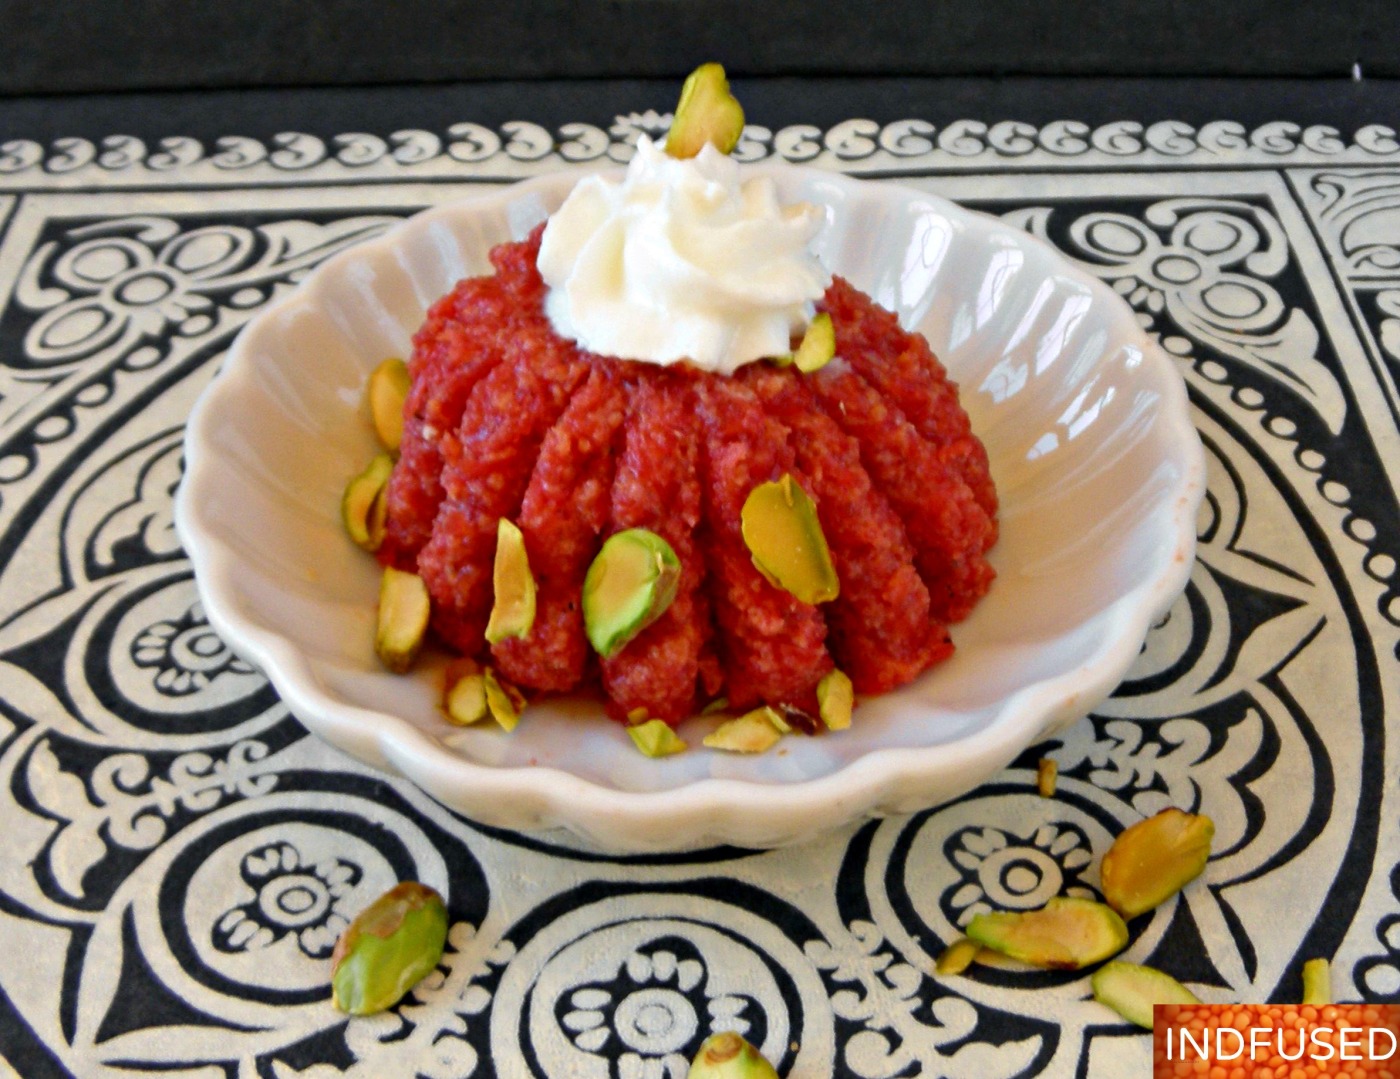 Indian fusion festive dessert halwa with an easy 10 minute microwave recipe. Vegetarian, gluten free Indian dessert